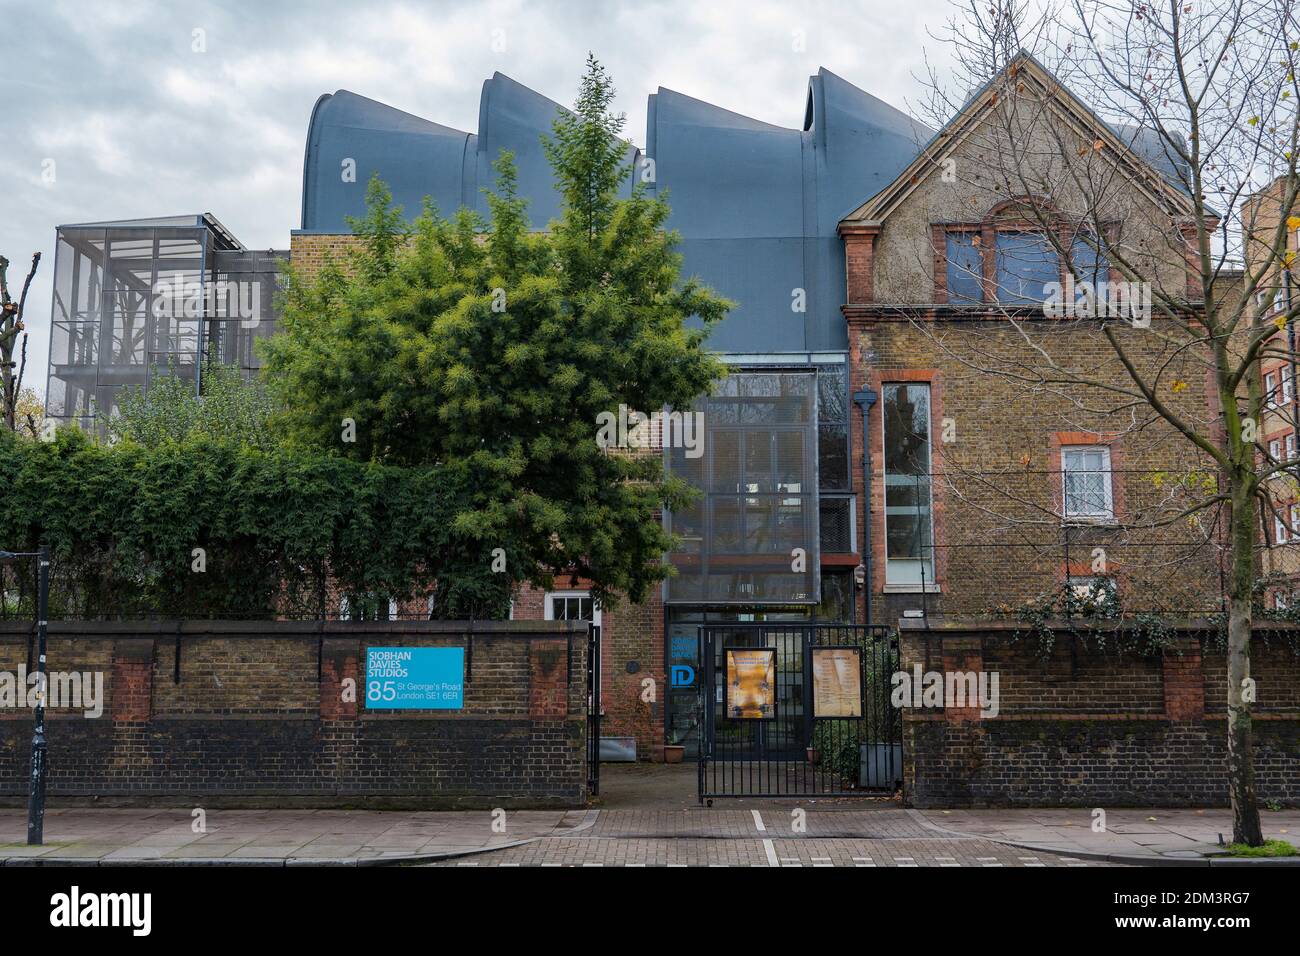 The Siobhan Davies Dance Studio on the 9th December in South London in the United Kingdom. Photo by Sam Mellish Stock Photo